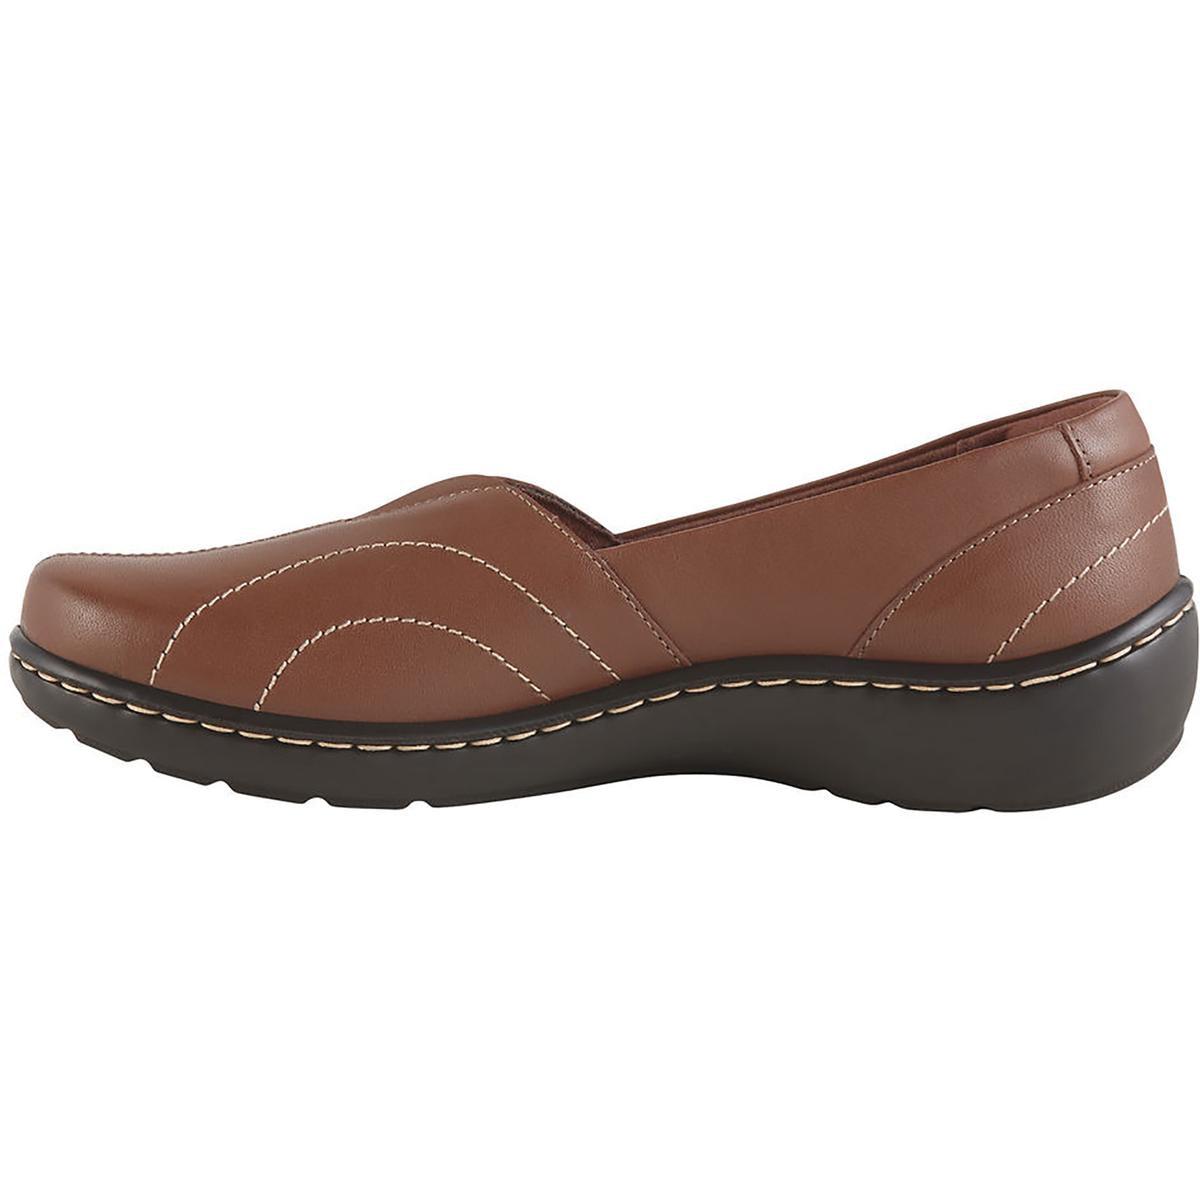 Clarks Cora Meadow Leather Arch Support Flats Shoes in Brown | Lyst